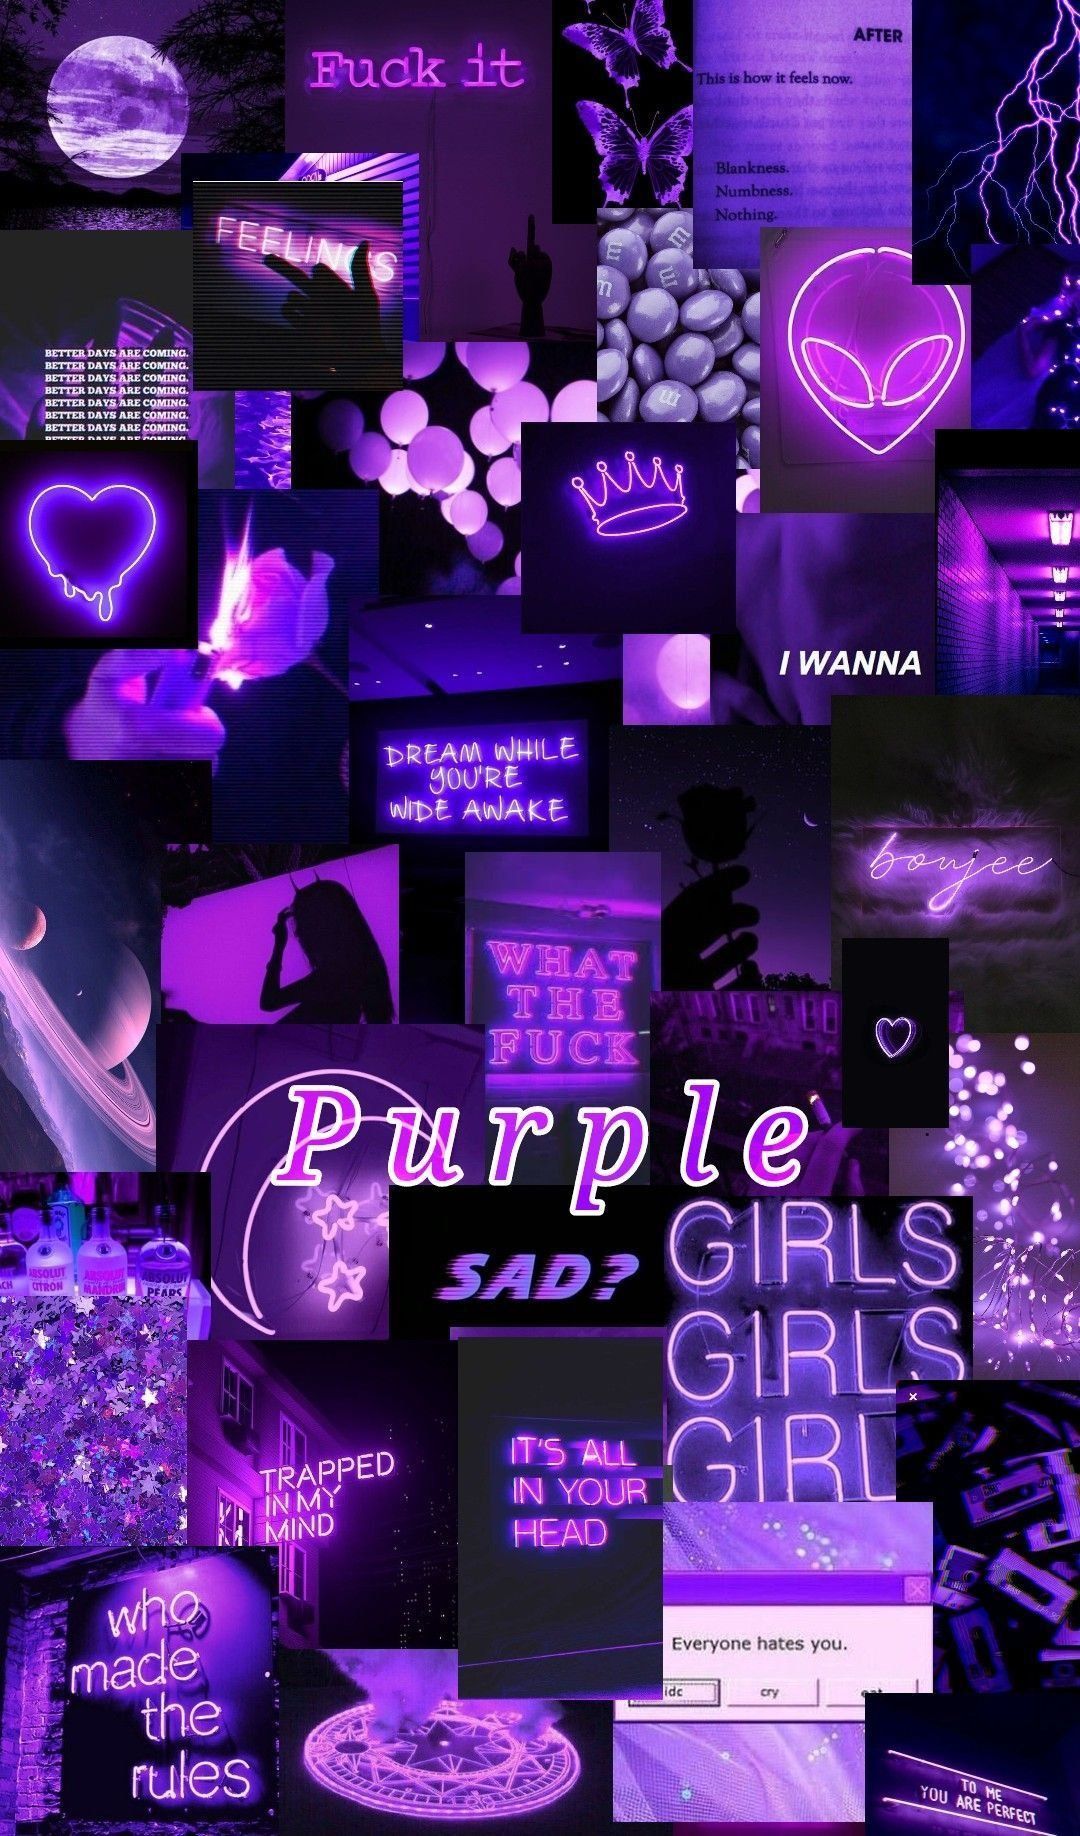 Aesthetic Purple iPhone Wallpaper with high-resolution 1080x1920 pixel. You can use this wallpaper for your iPhone 5, 6, 7, 8, X, XS, XR backgrounds, Mobile Screensaver, or iPad Lock Screen - Neon purple, violet, purple